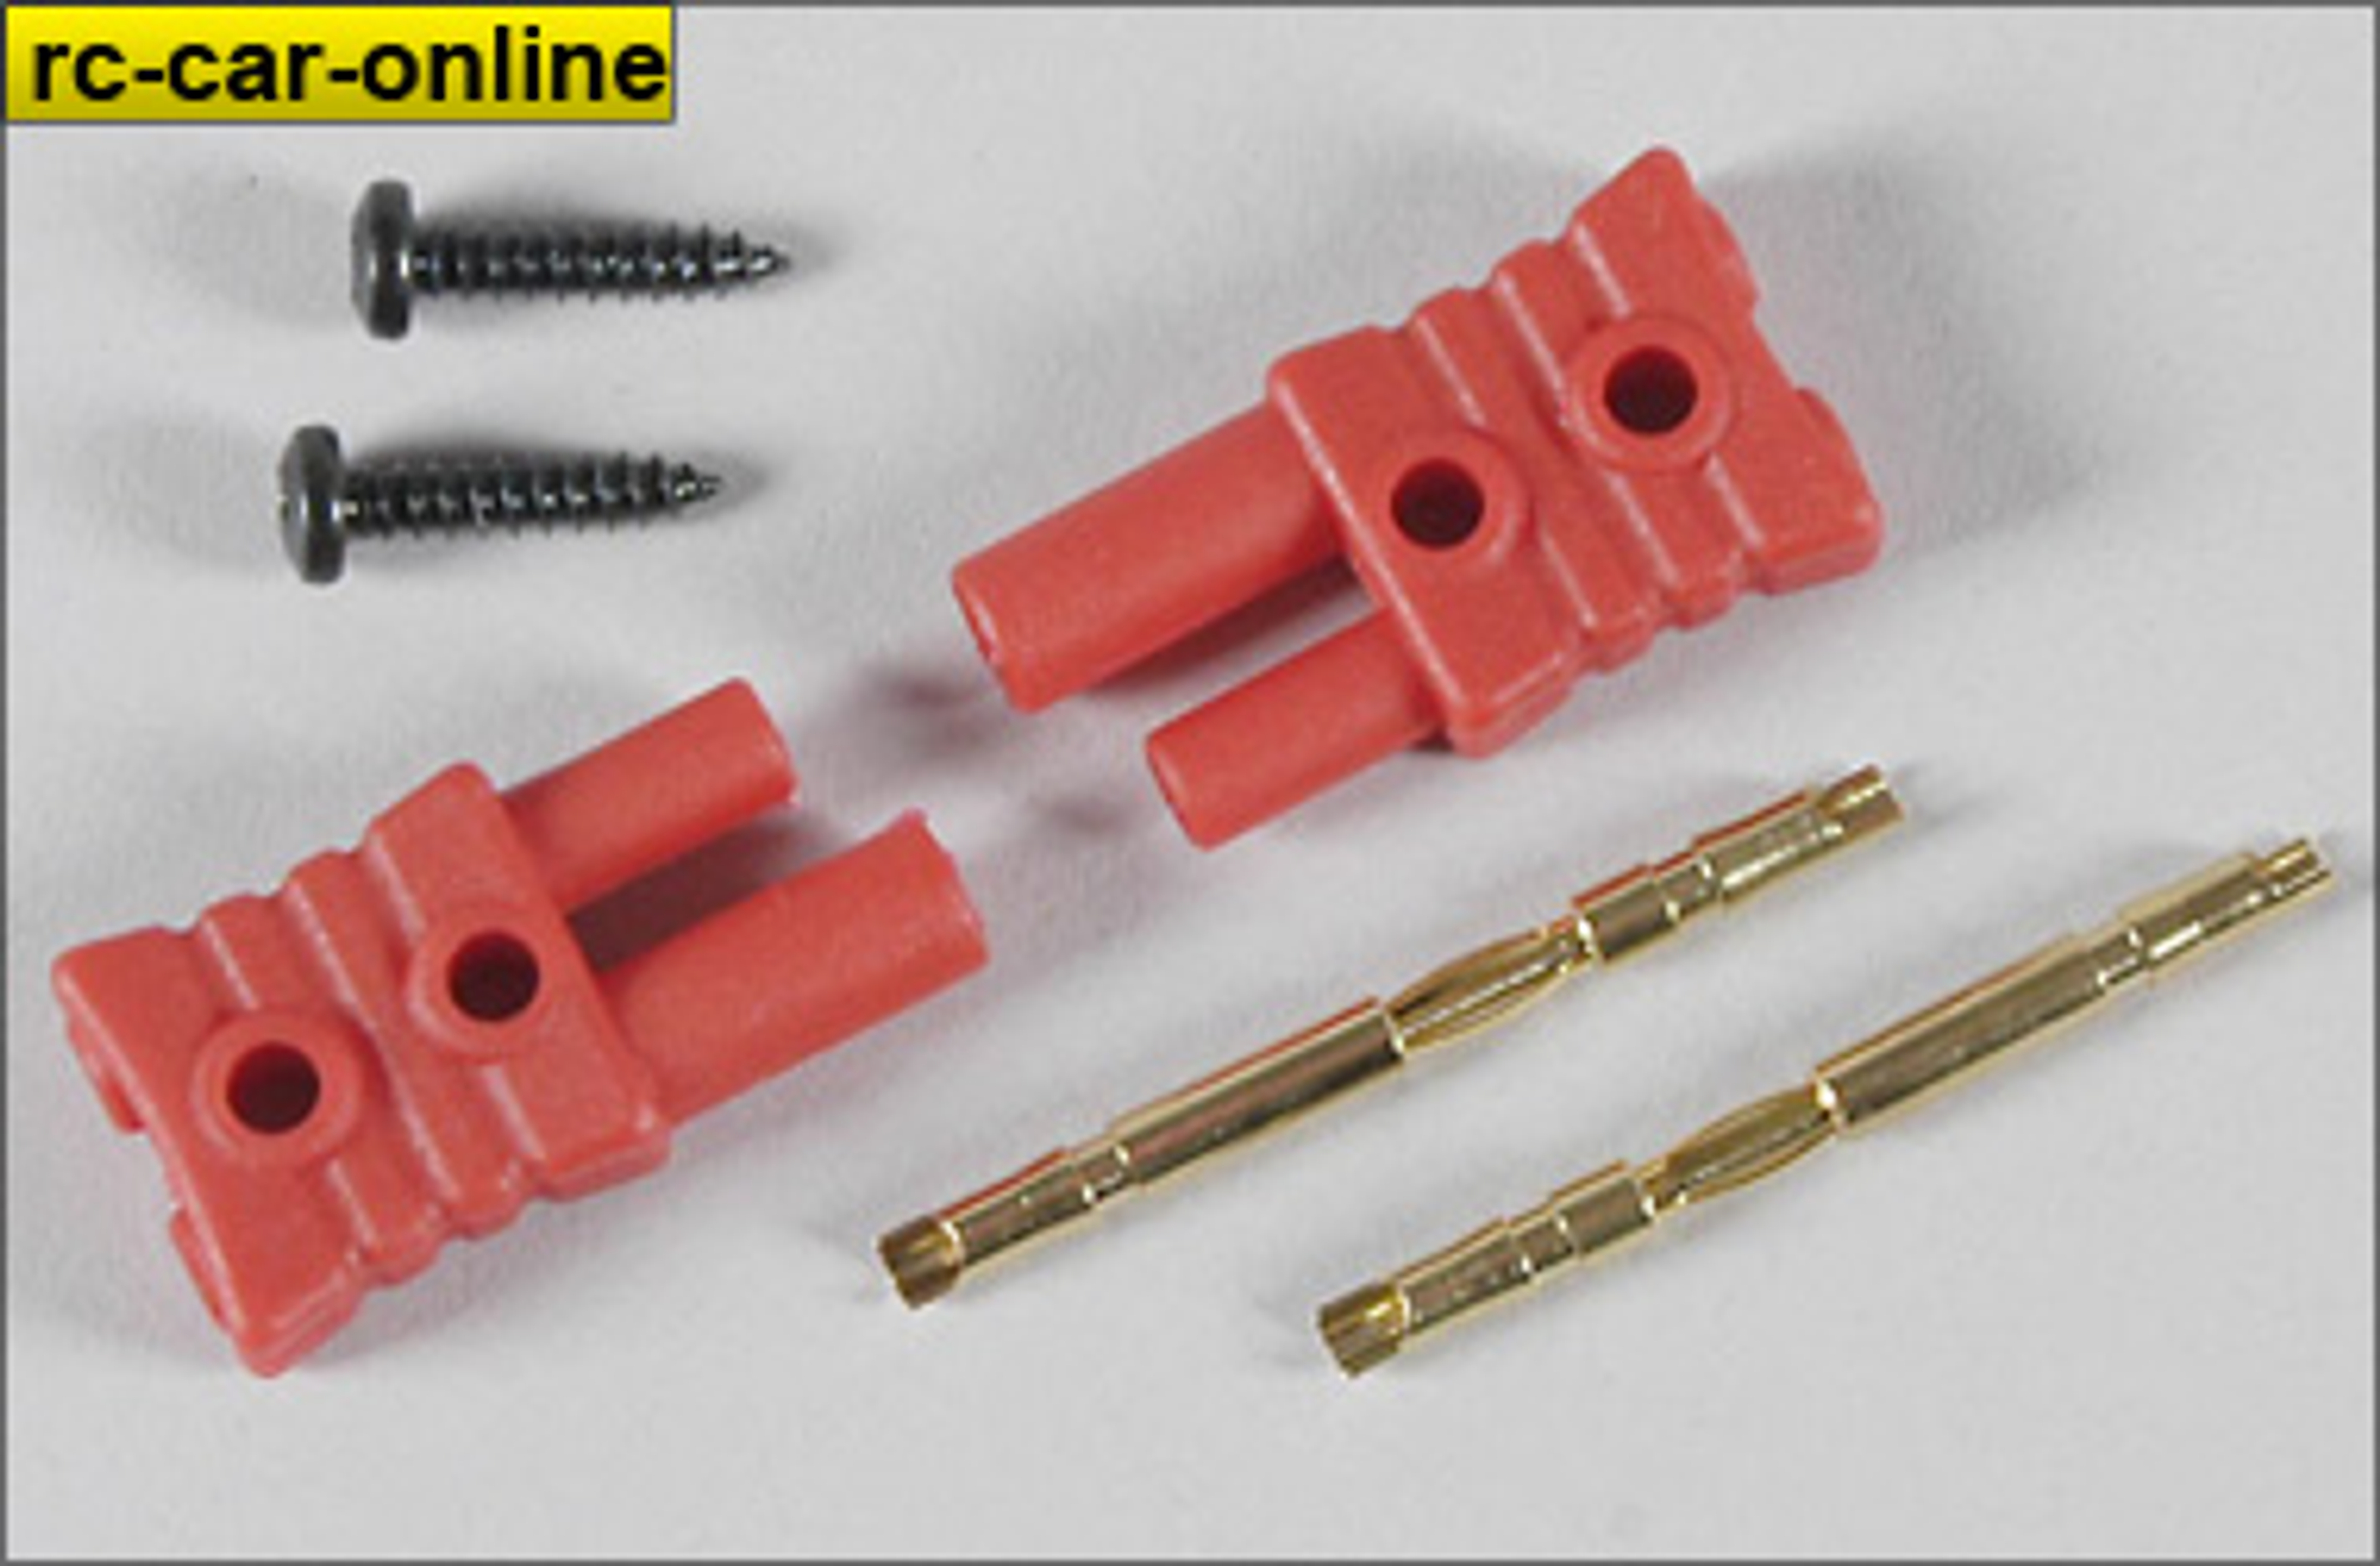 6545 FG gold contact plug-in system 2mm - 2pcs.